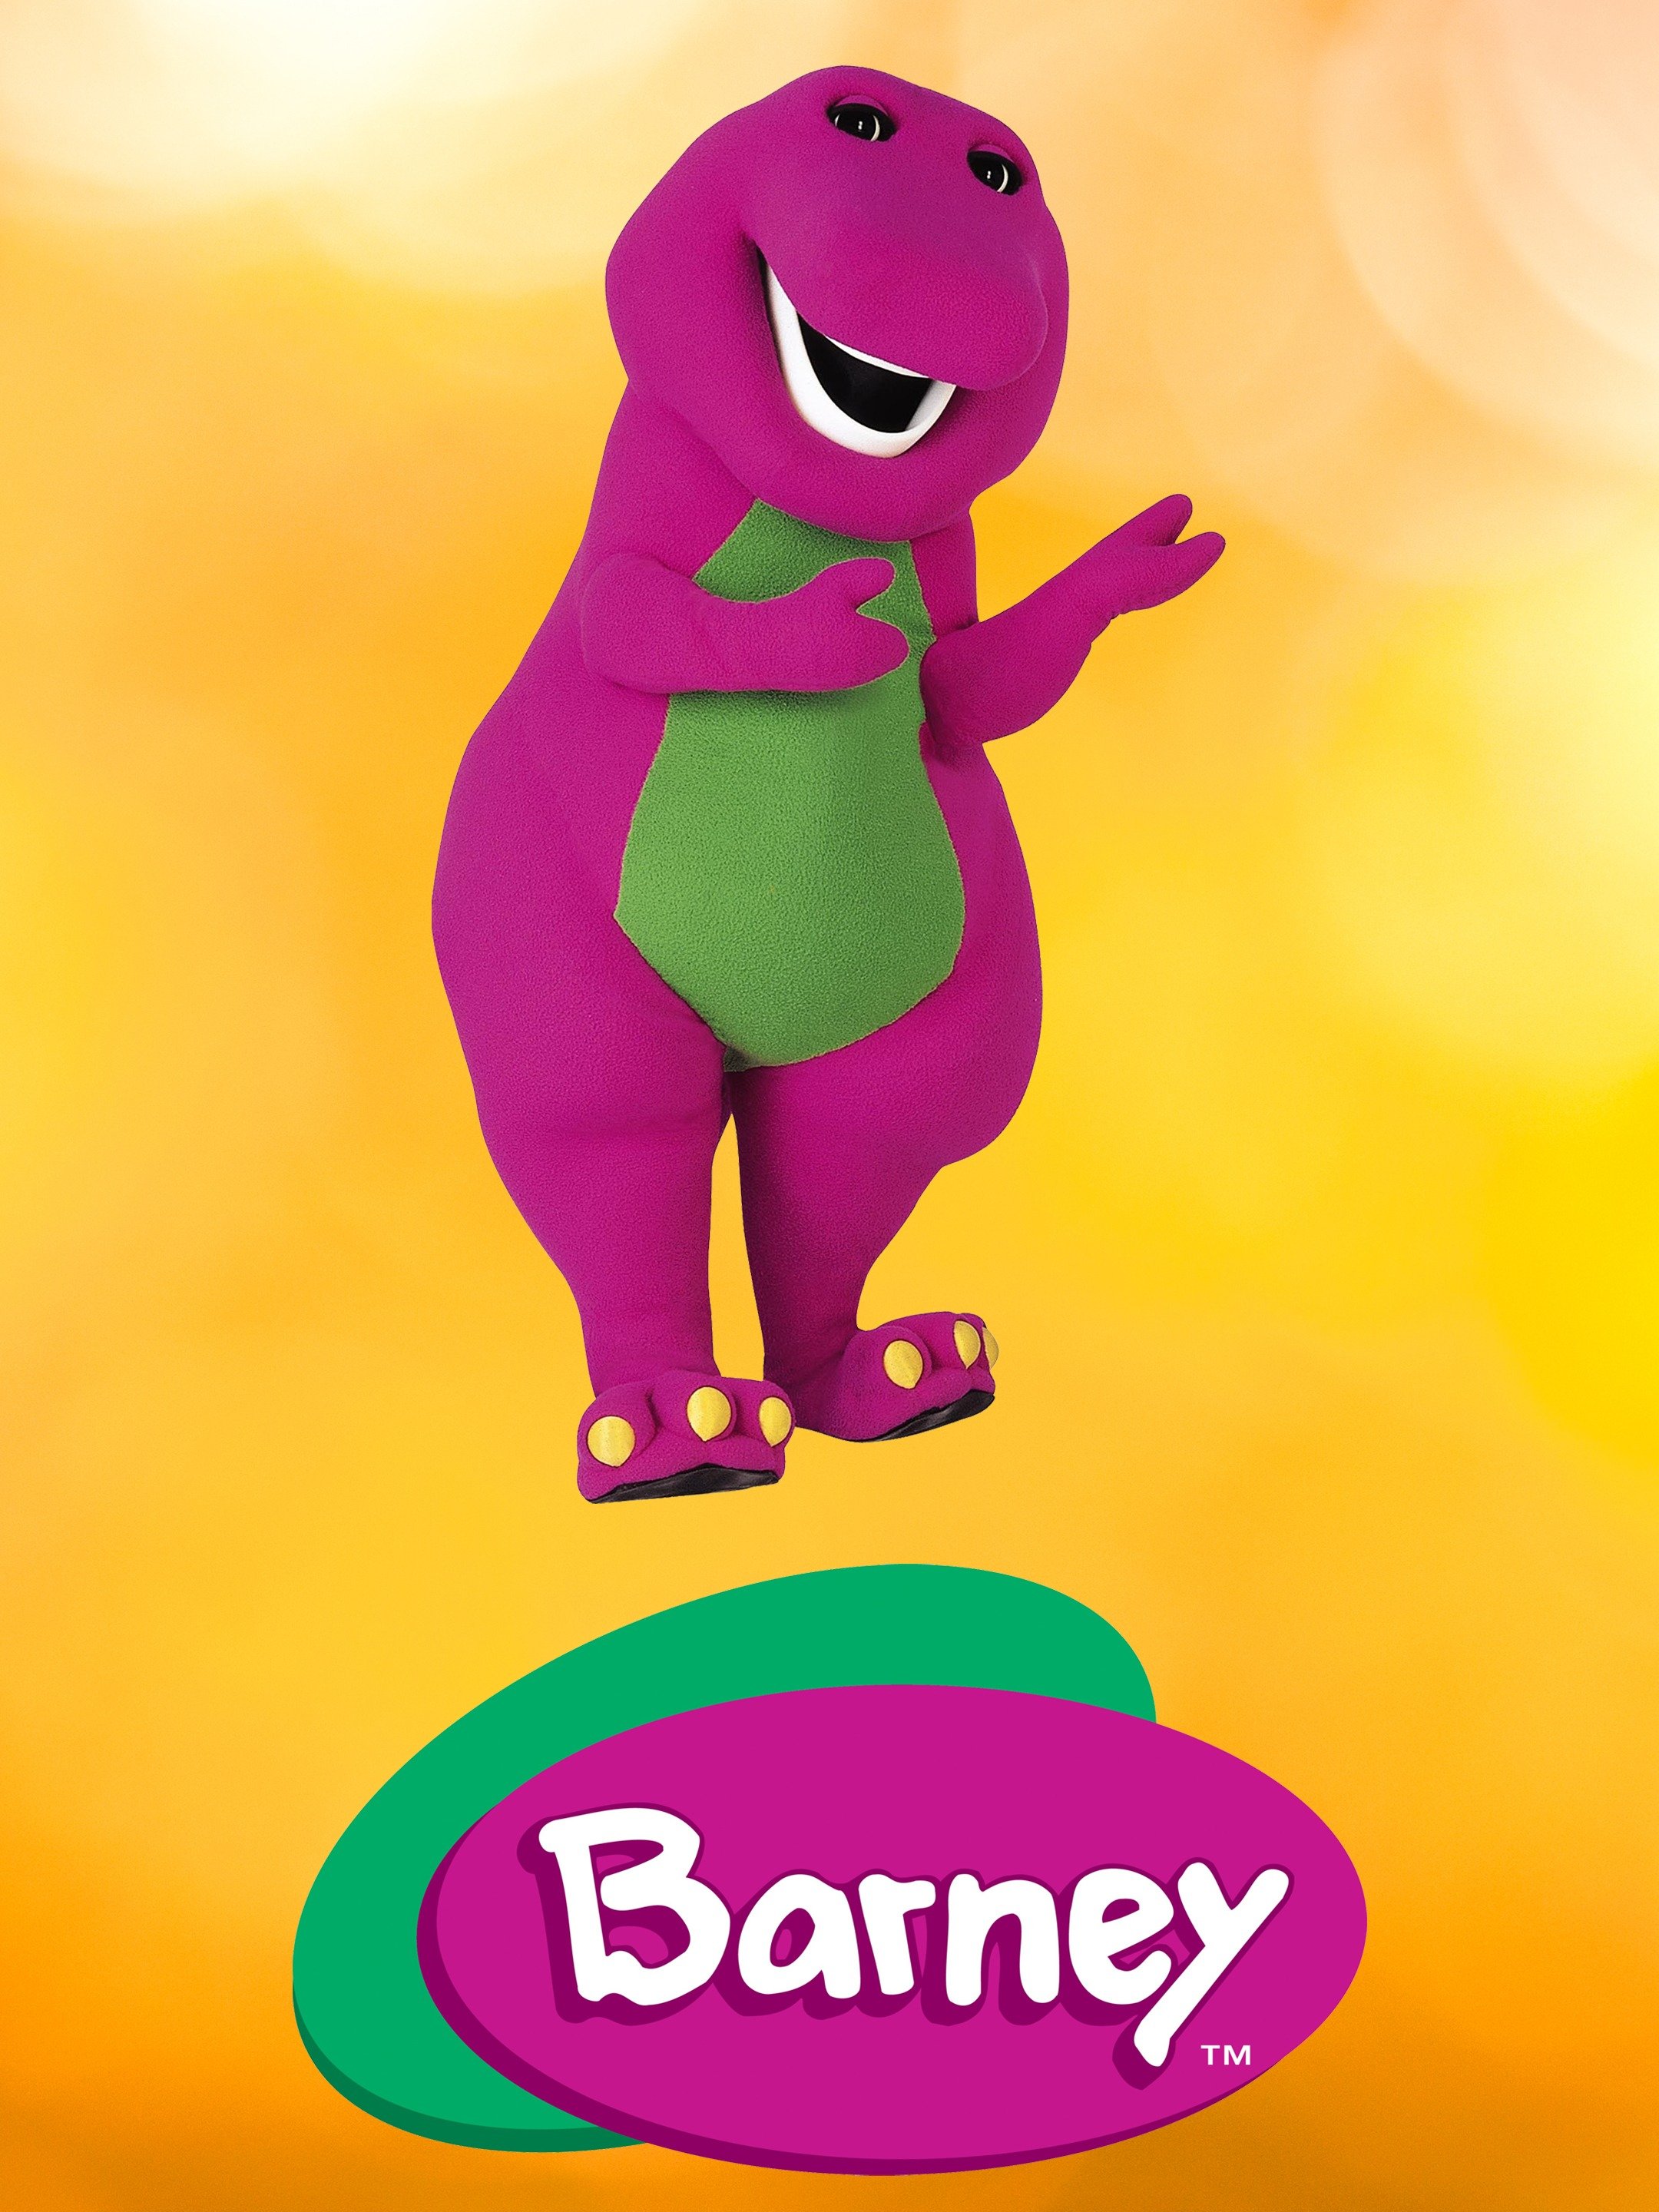 bj barney and friends voice